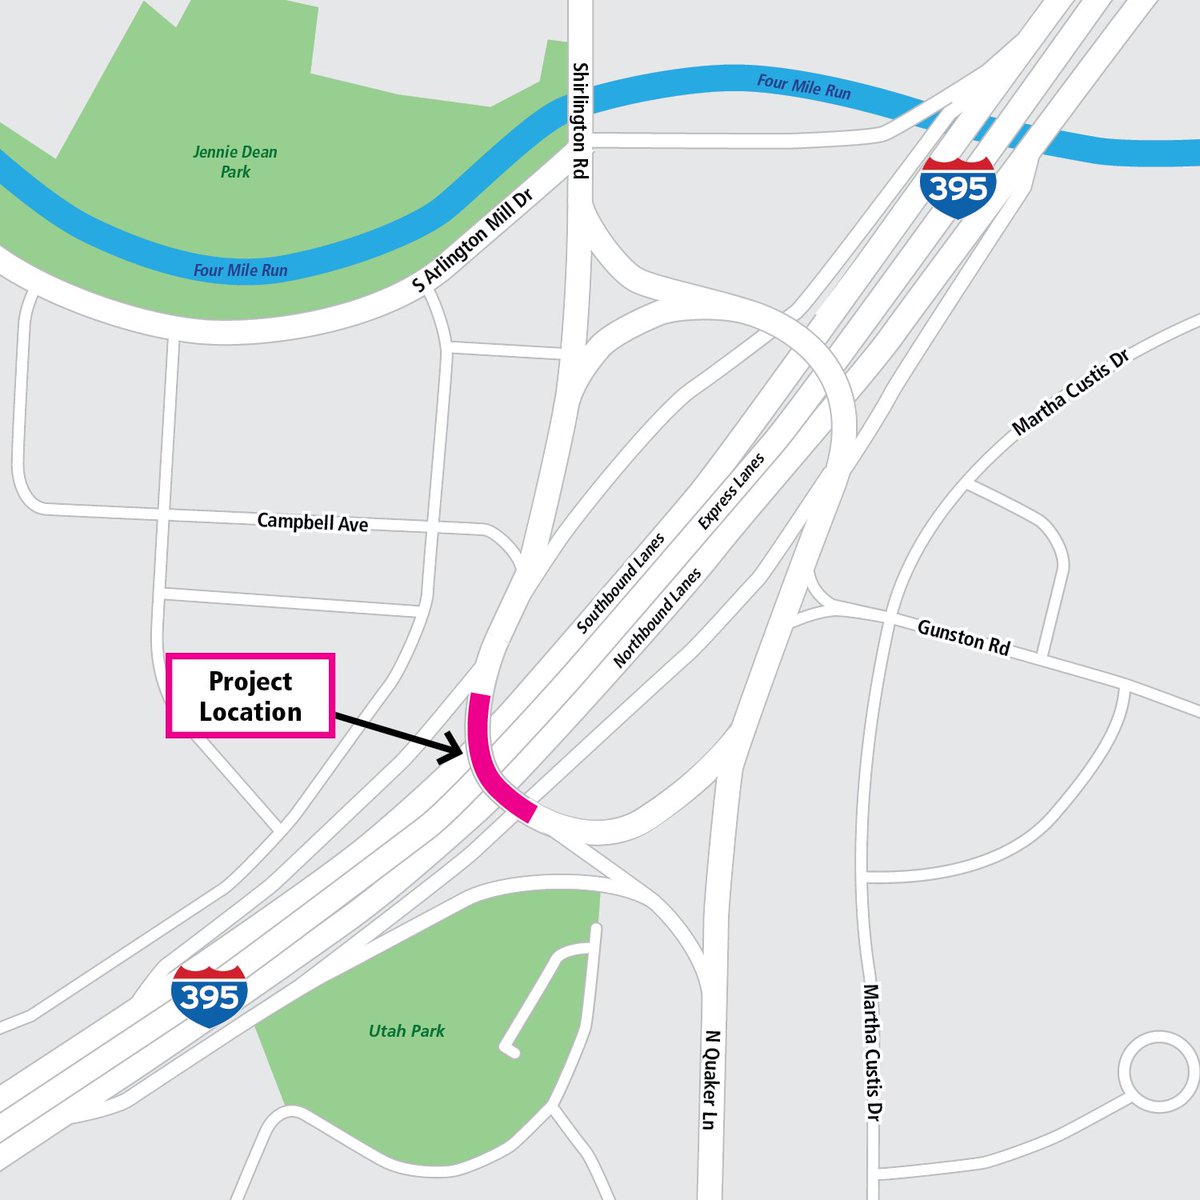 🚧Traffic Alert - #Shirlington: Between 11 pm Sat 5/11 and 9 am Sun 5/12, NB-running 395 @VAExpressLanes will have double-lane closures at the Shirlington interchange to implement a traffic shift for the south rotary bridge project. #VaTraffic

More: bit.ly/3UyPv85